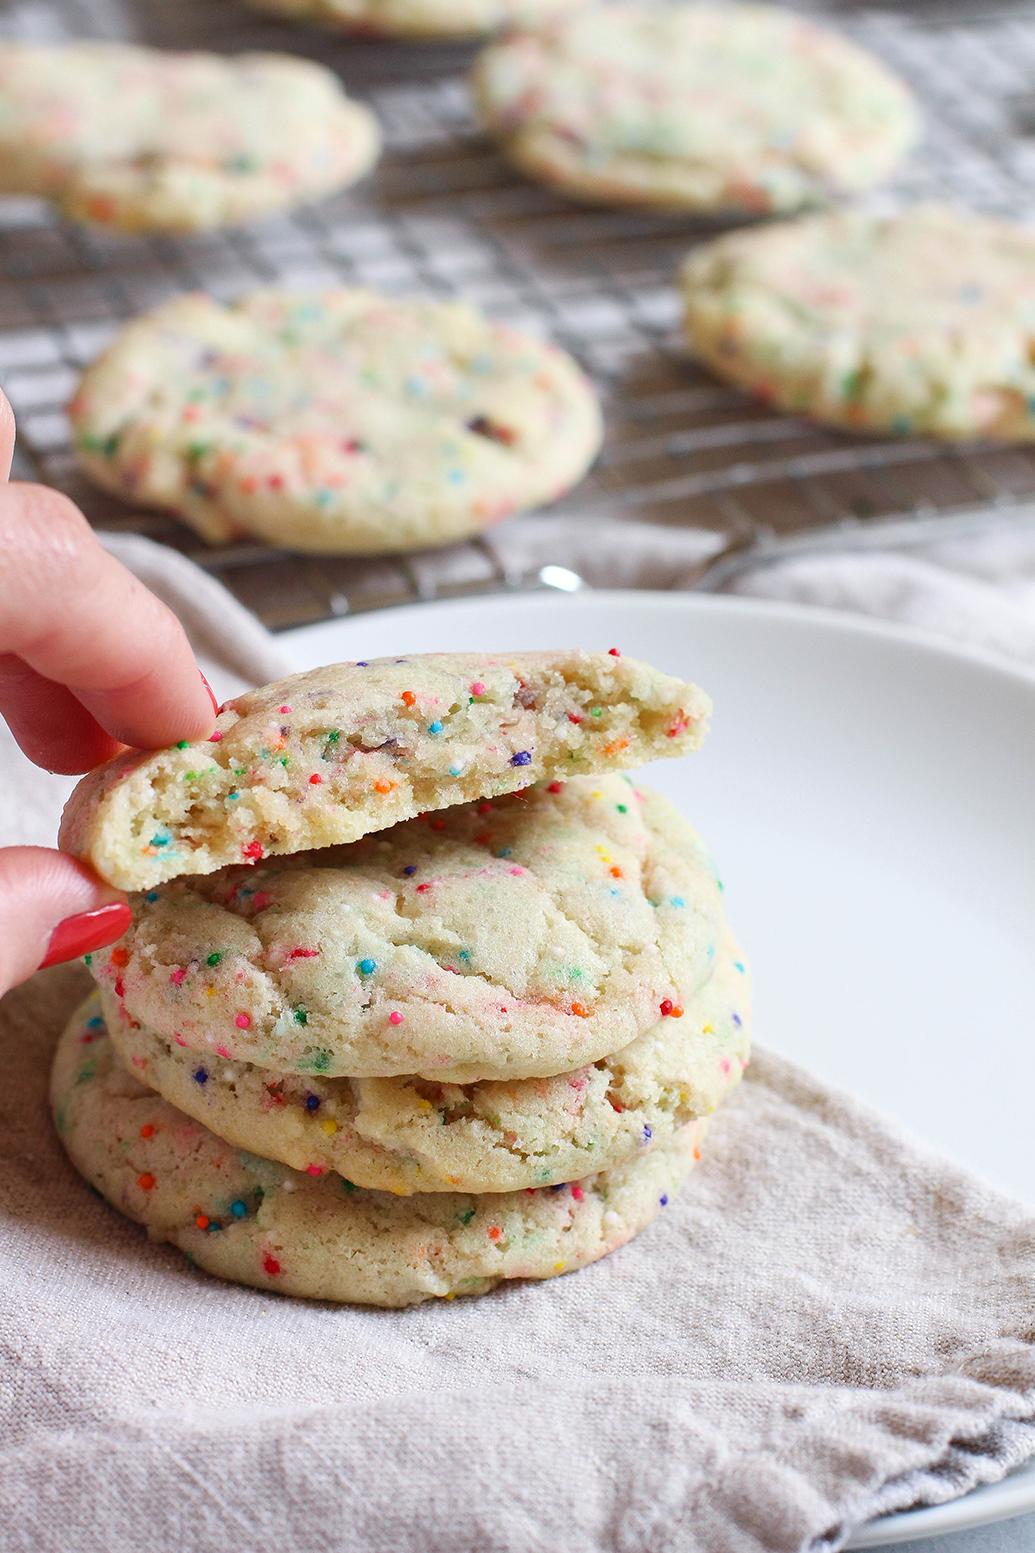  These cookies are perfect for any occasion - from holiday parties to midday snacks.